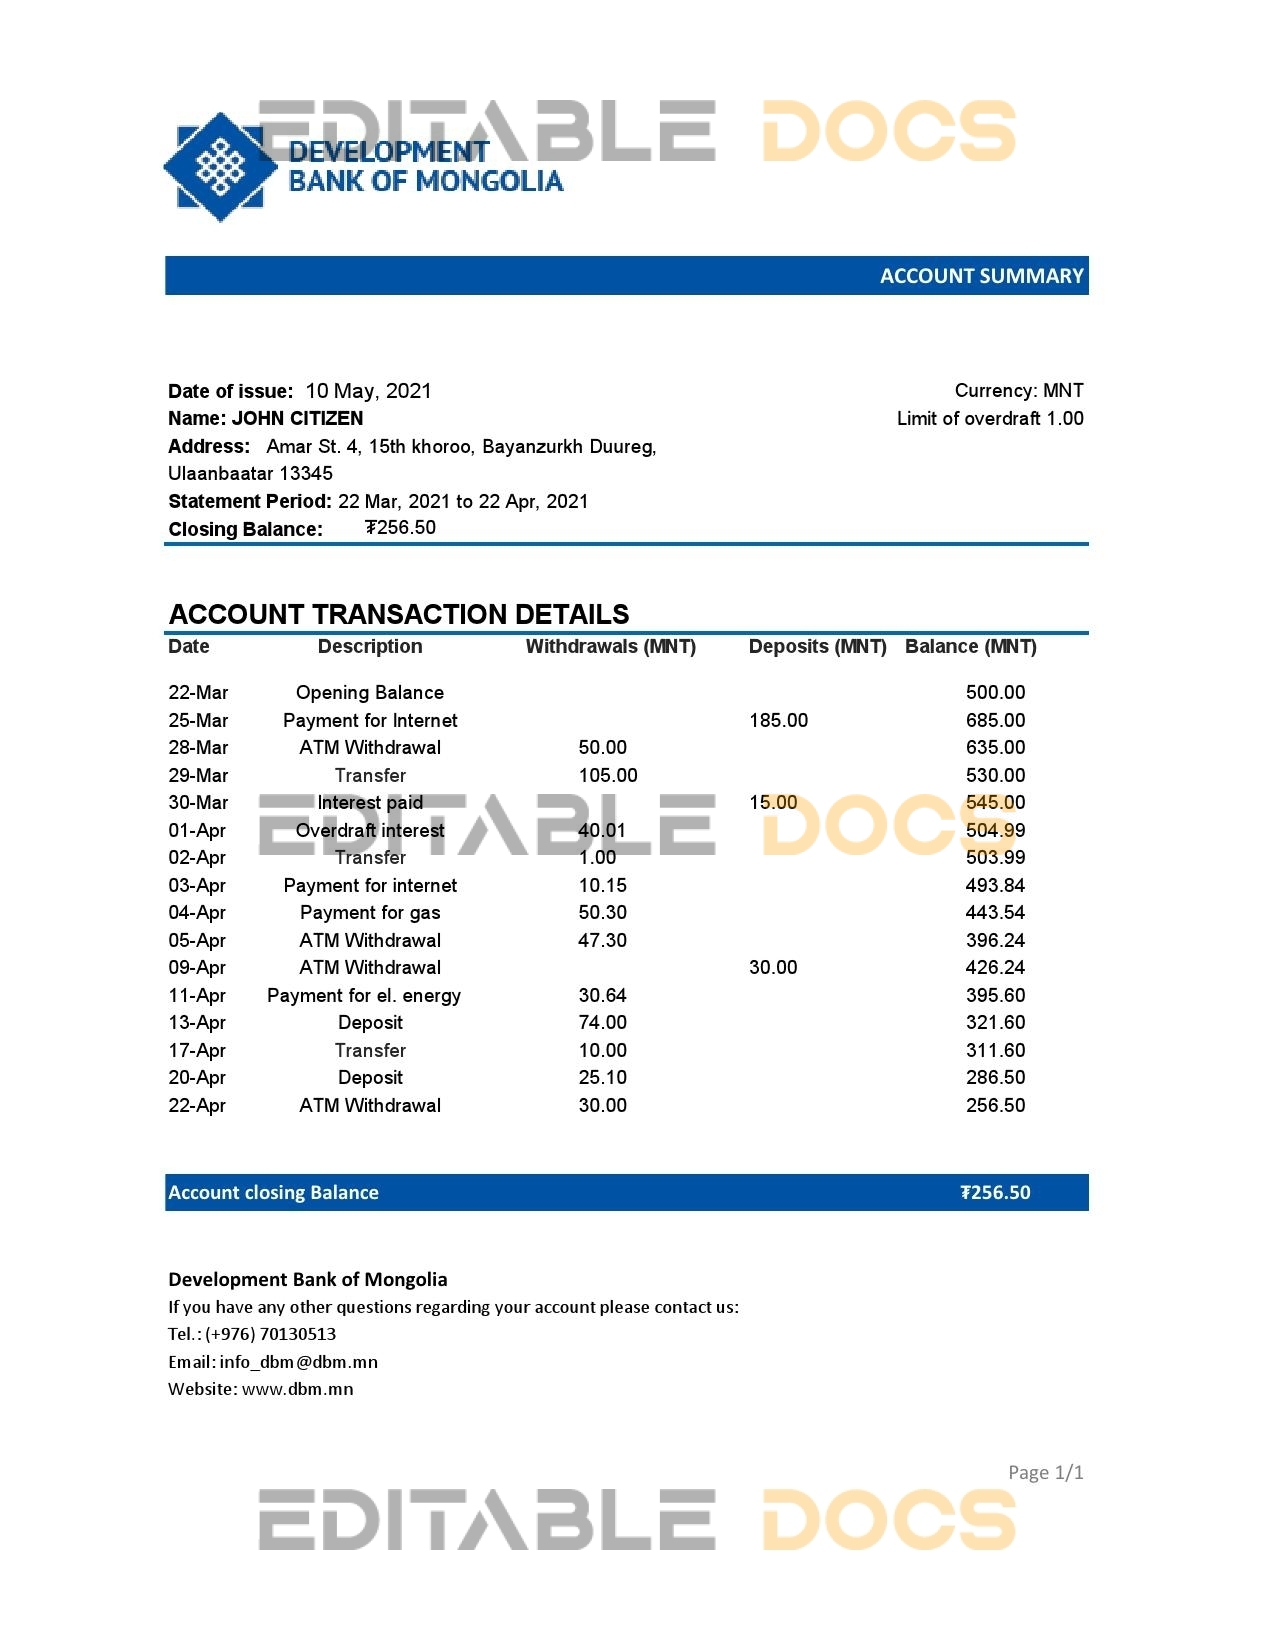 Mongolia Development Bank of Mongolia bank statement easy to fill template in .xls and .pdf file format